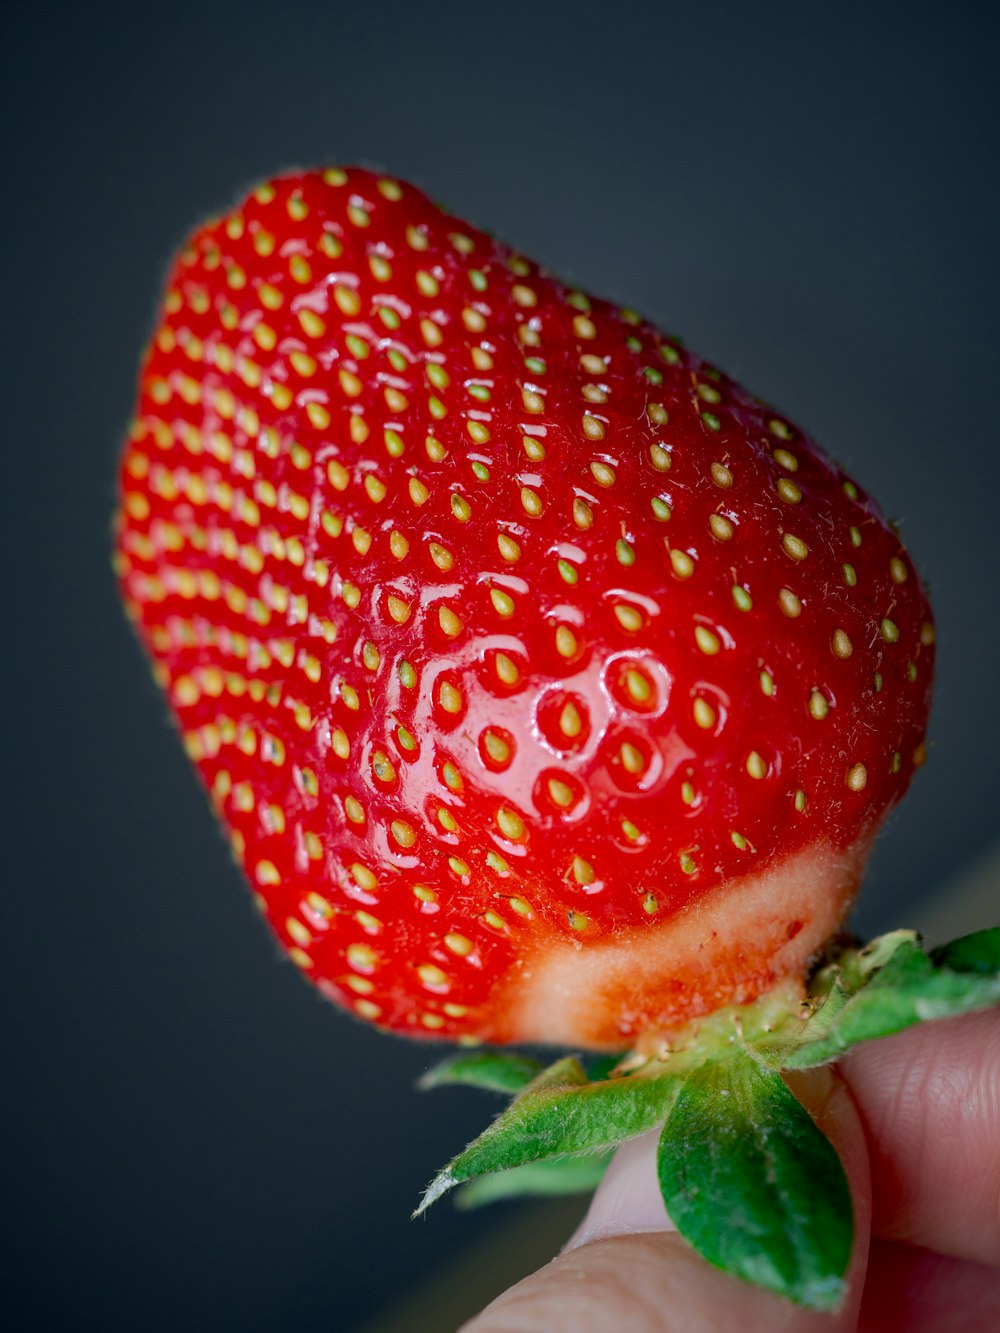 red strawberry in close up photography